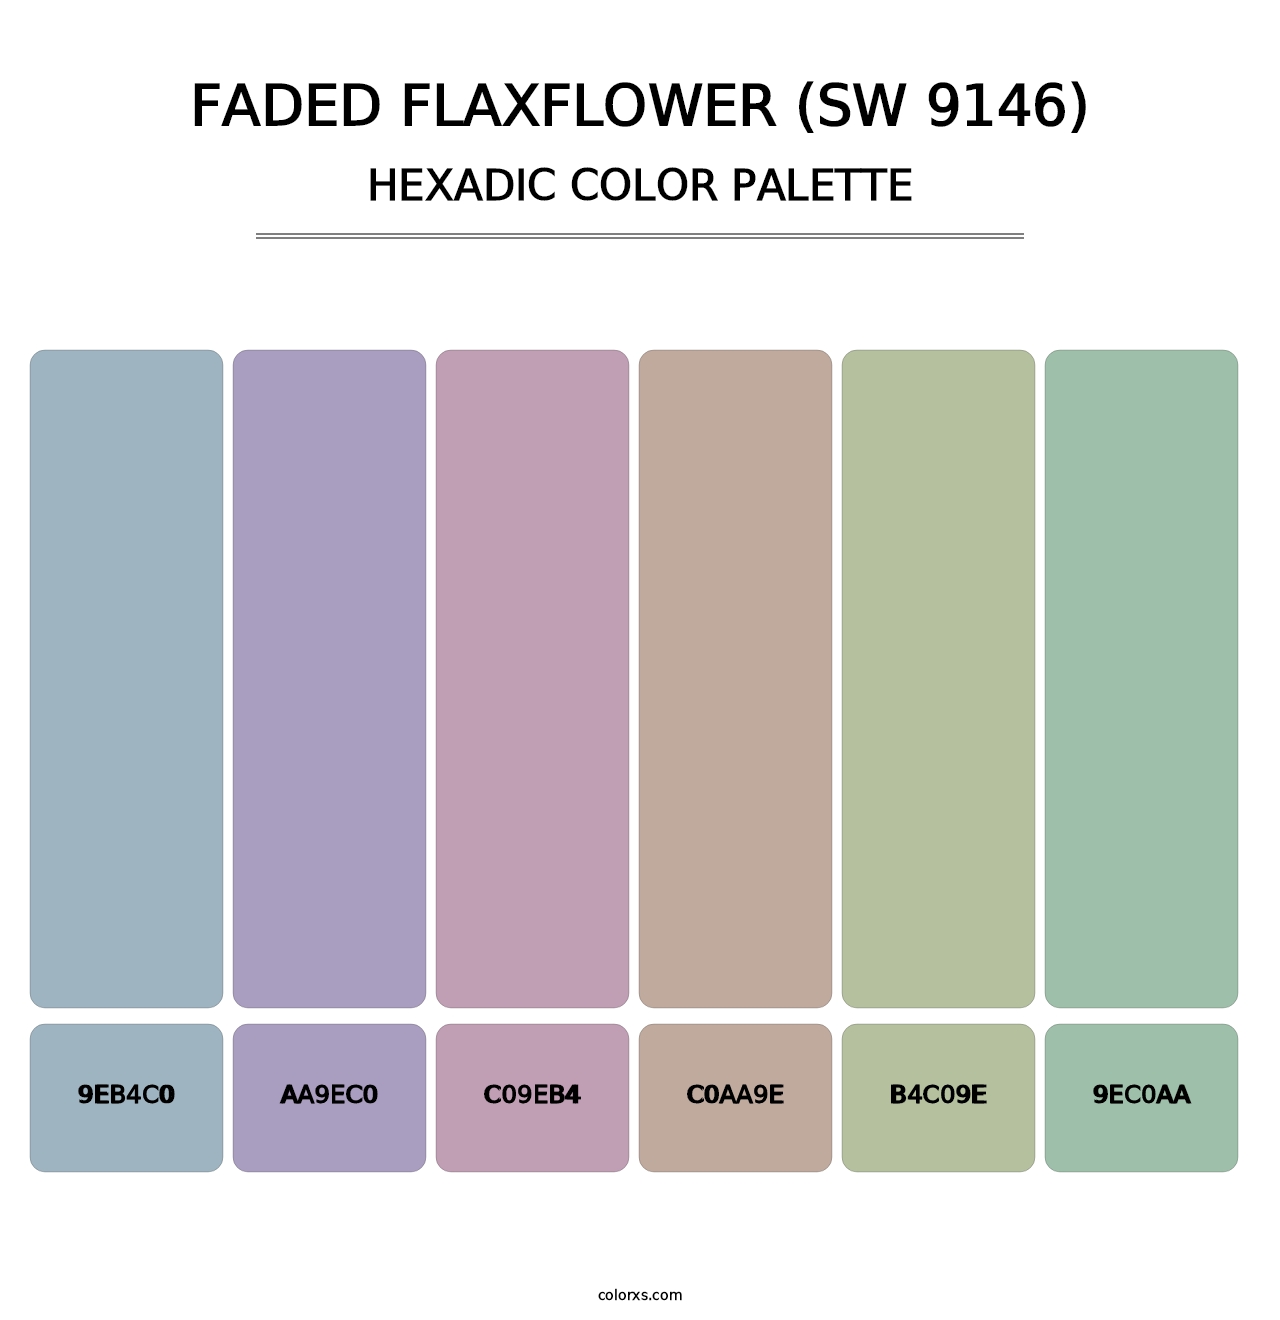 Faded Flaxflower (SW 9146) - Hexadic Color Palette